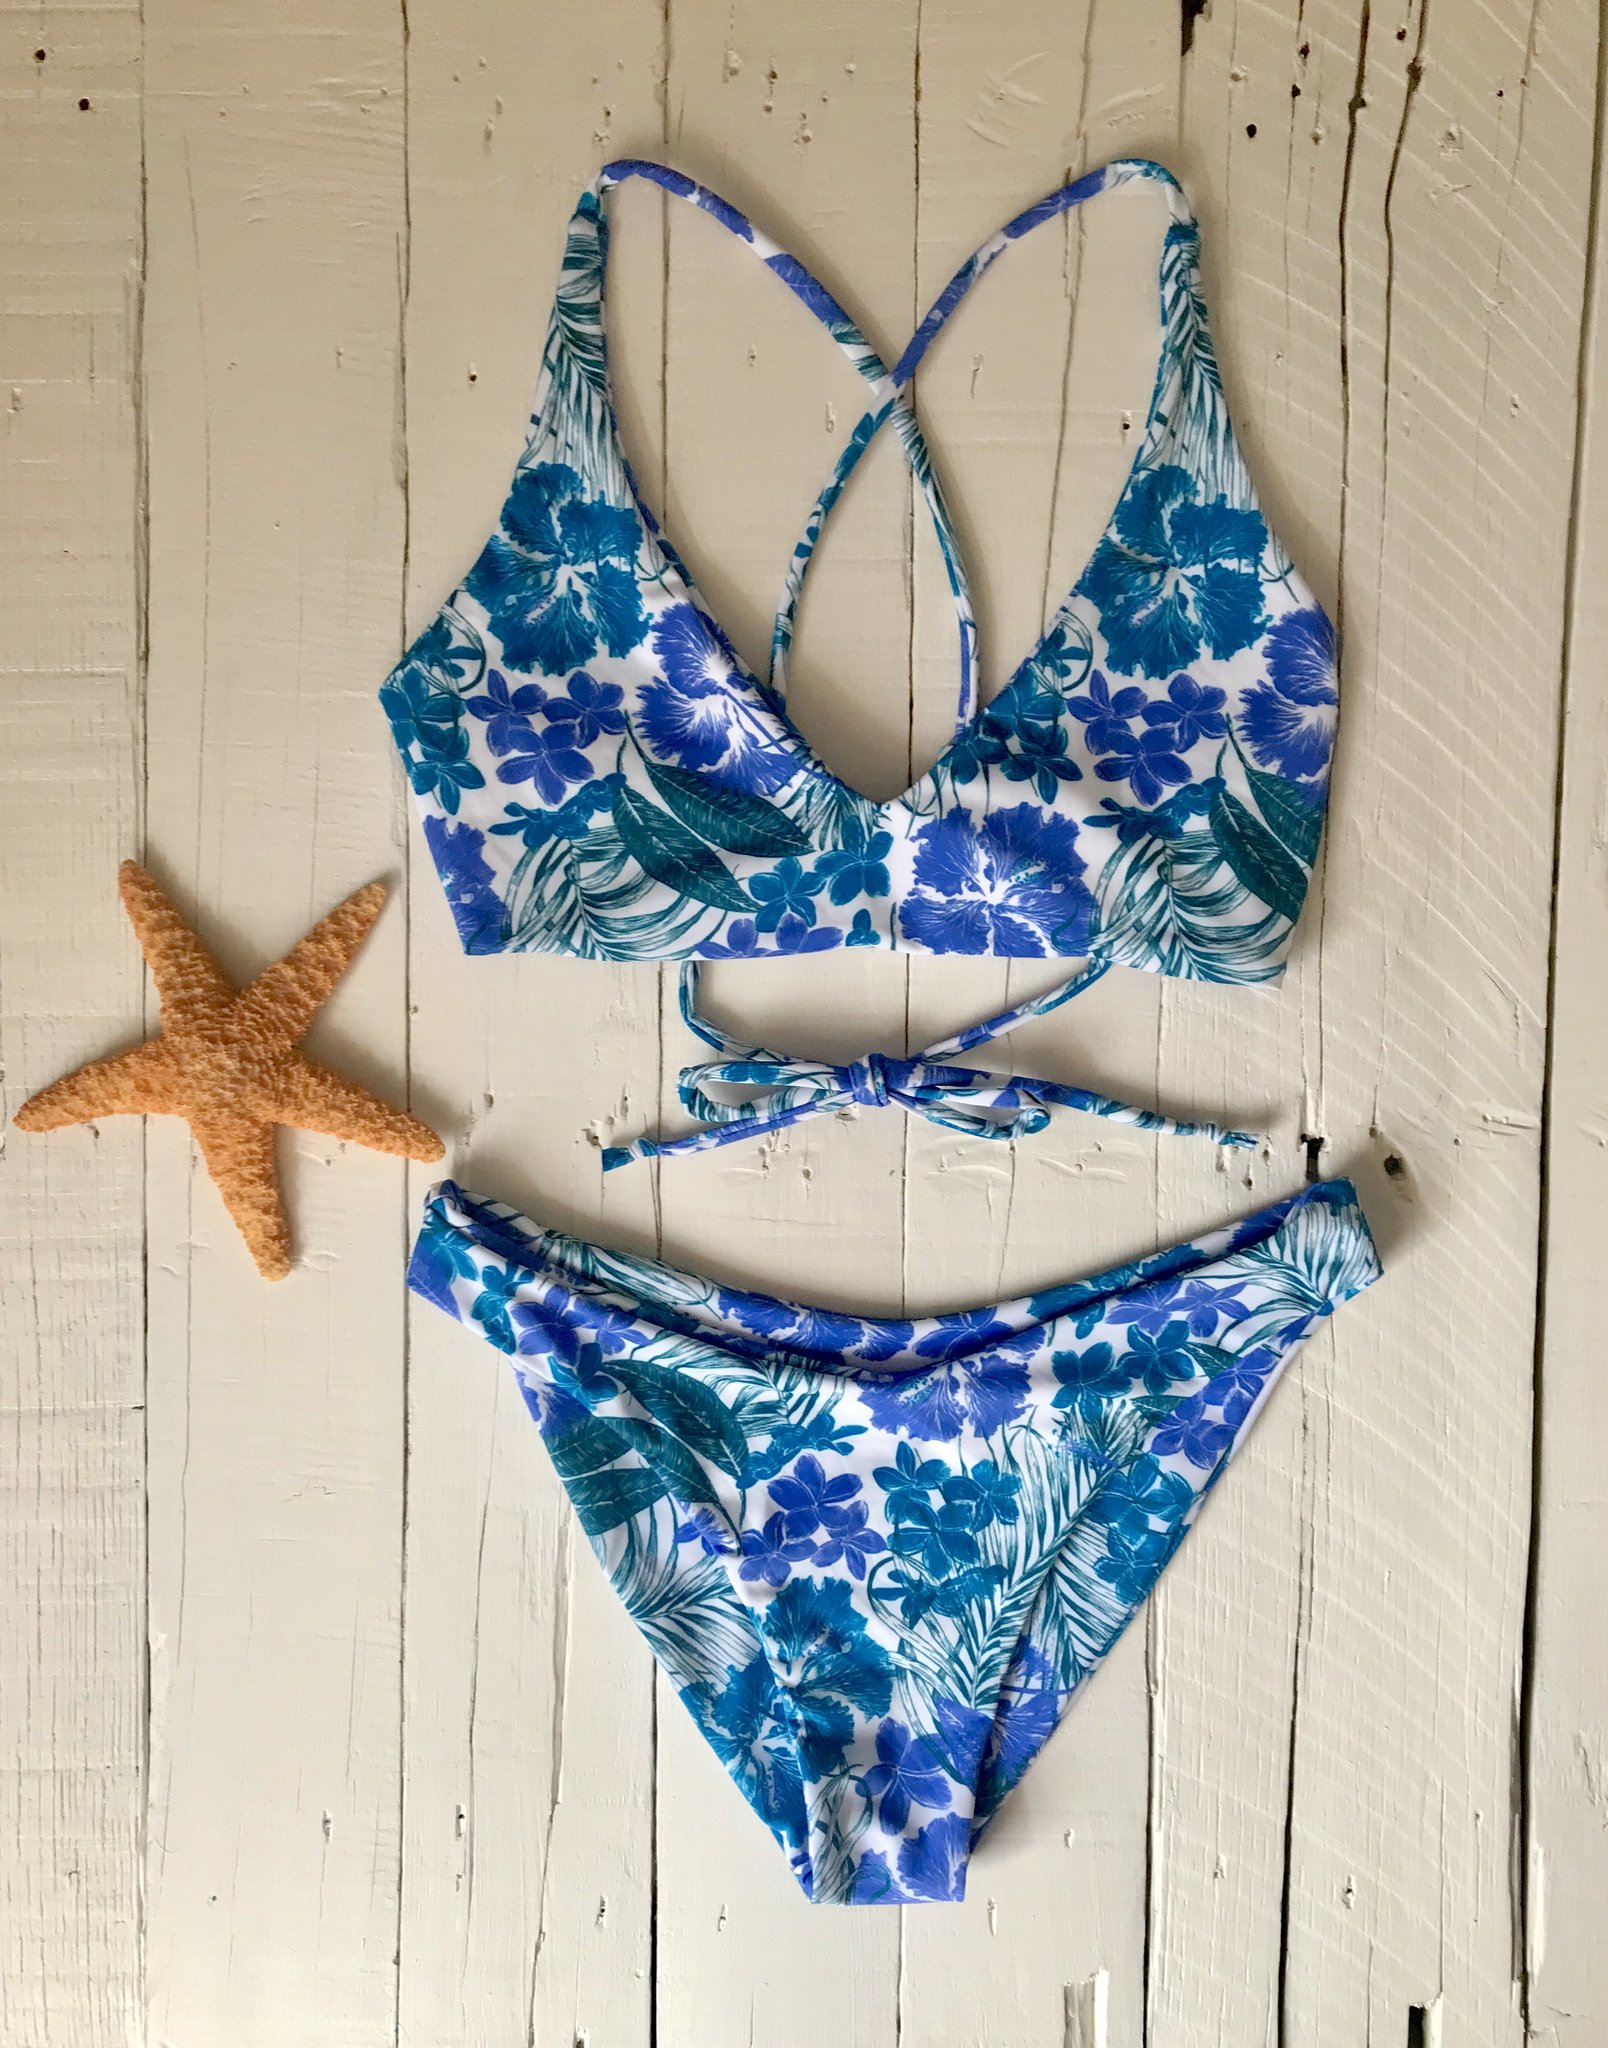 Life Isn't Perfect, But Your Swimsuit with Keep Me Coastal Swimwear Can ...